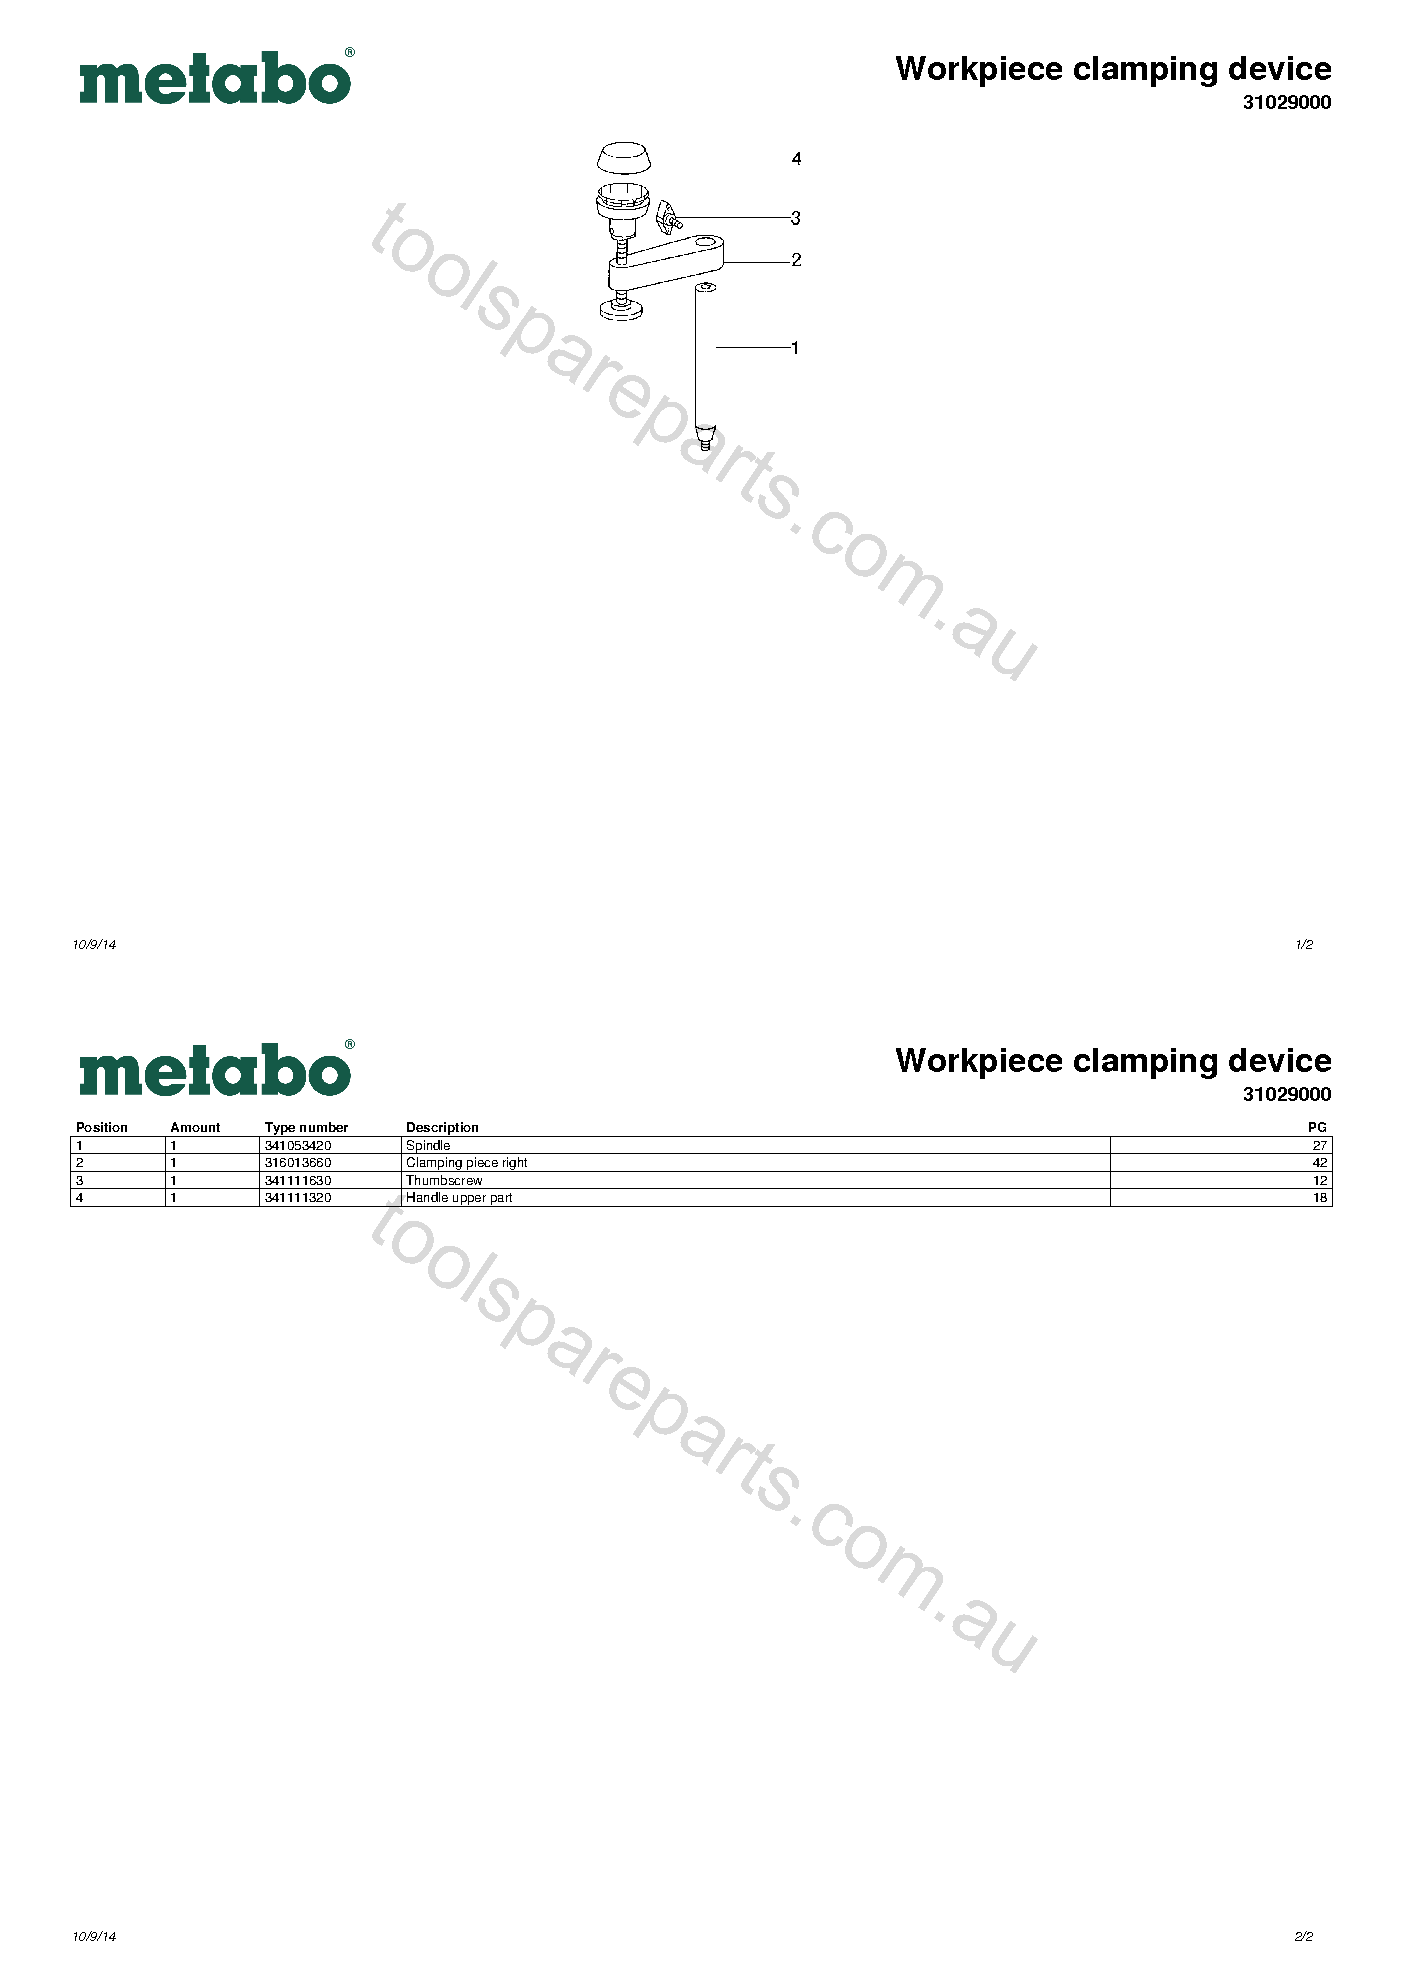 Metabo Workpiece clamping device 31029000  Diagram 1